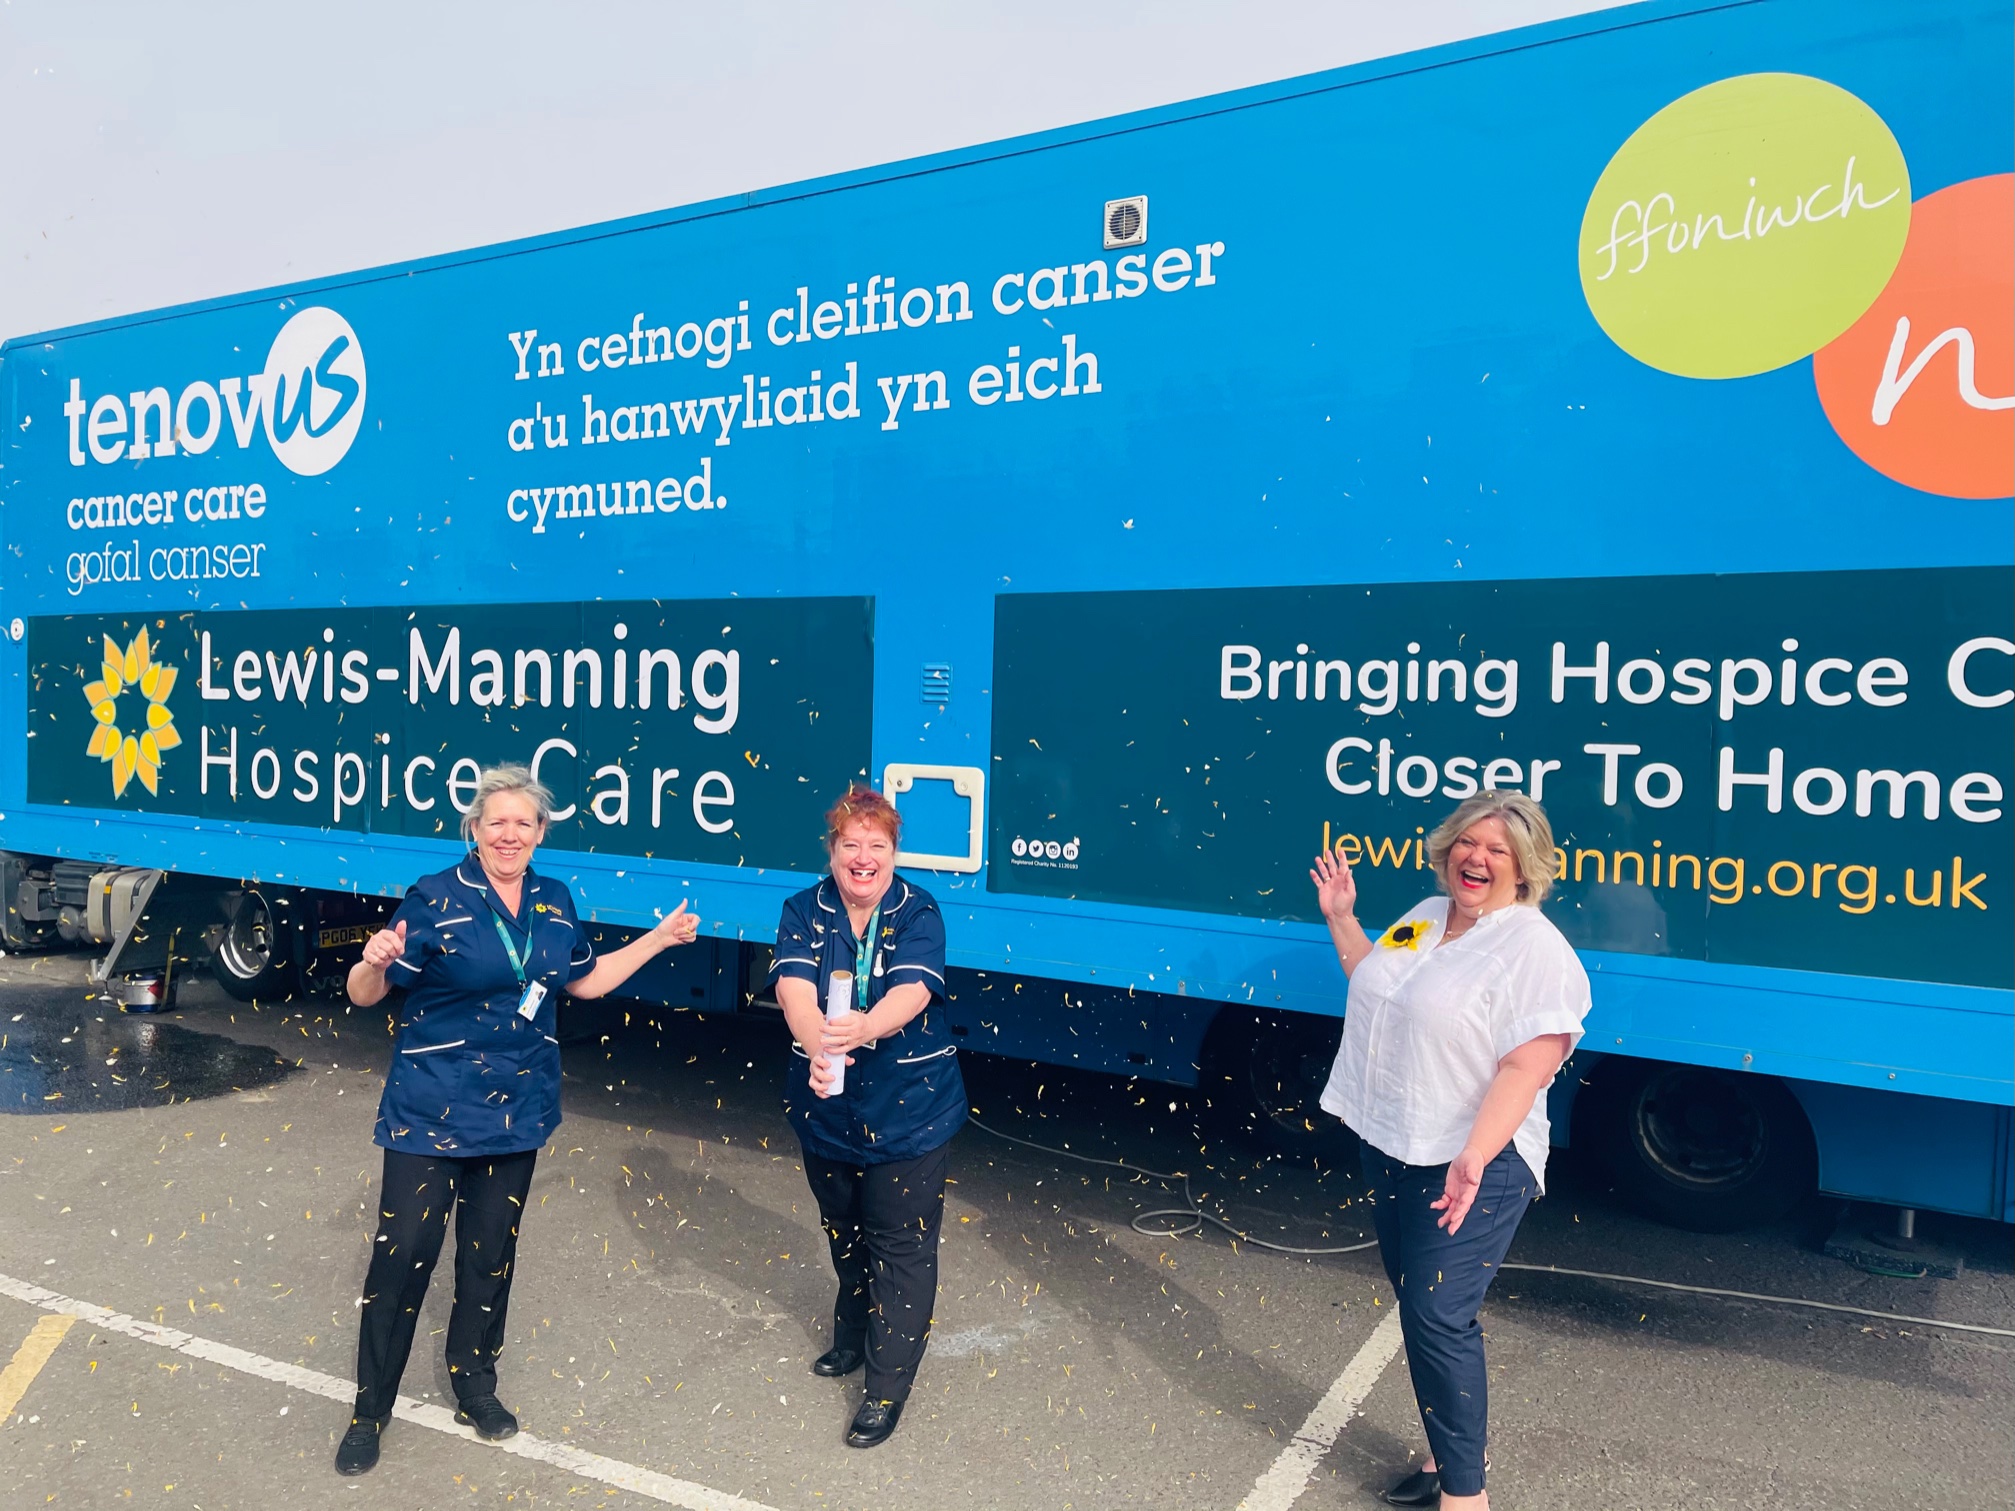 Lewis-Manning Hospice Care launches new Mobile Lymphoedema Clinic